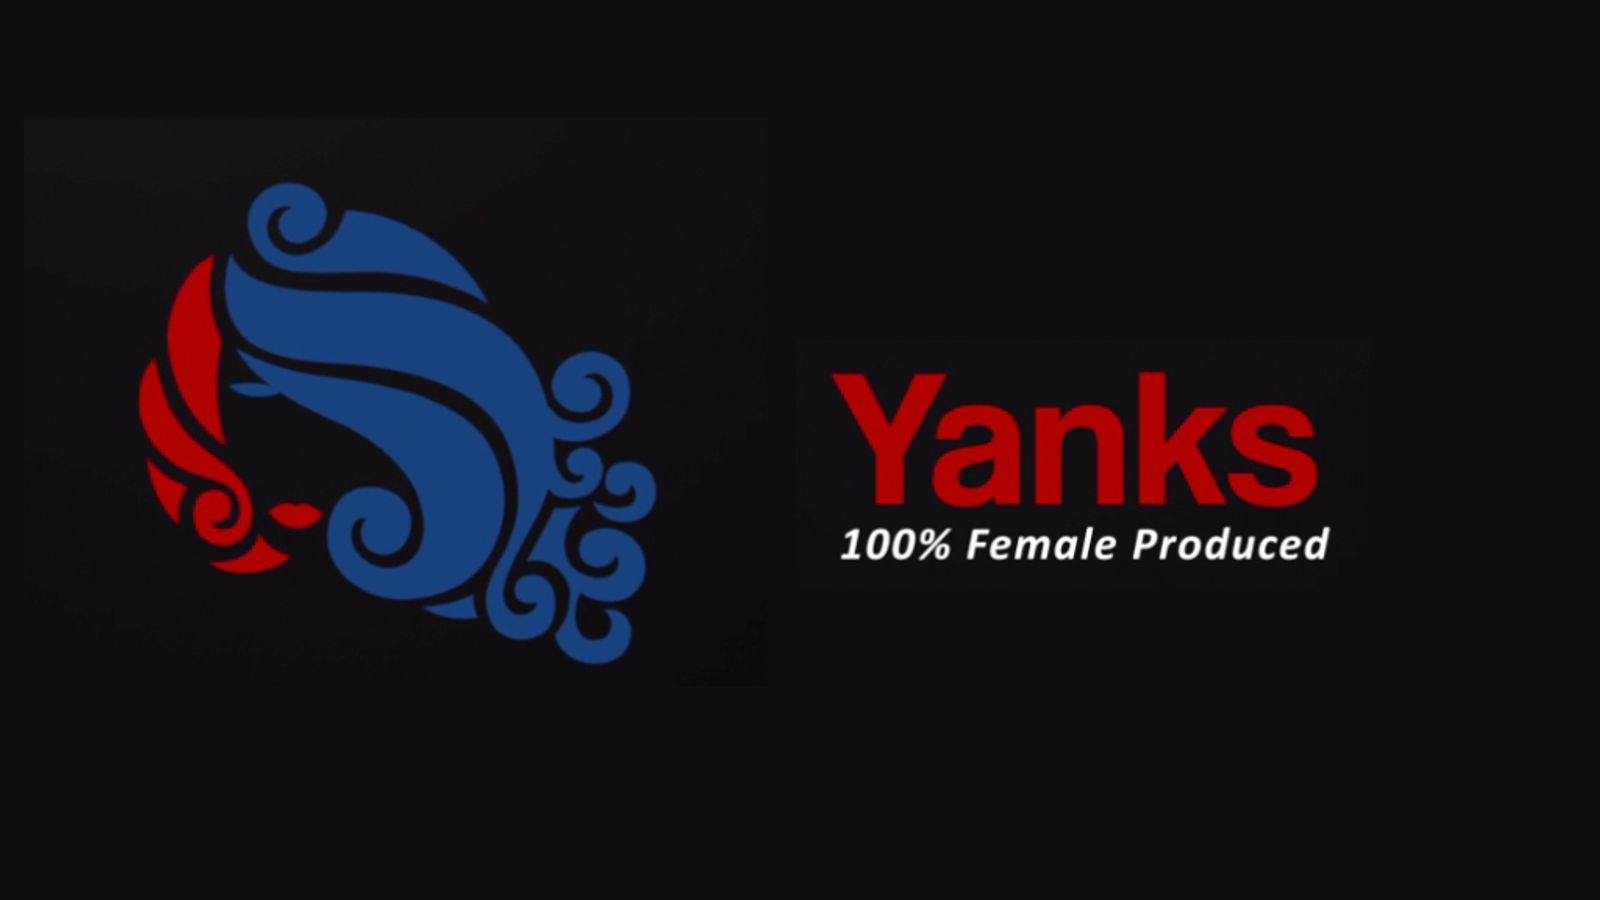 Yanks/YanksVR Will Be At AVN's Webmaster Access Sept. 8-11